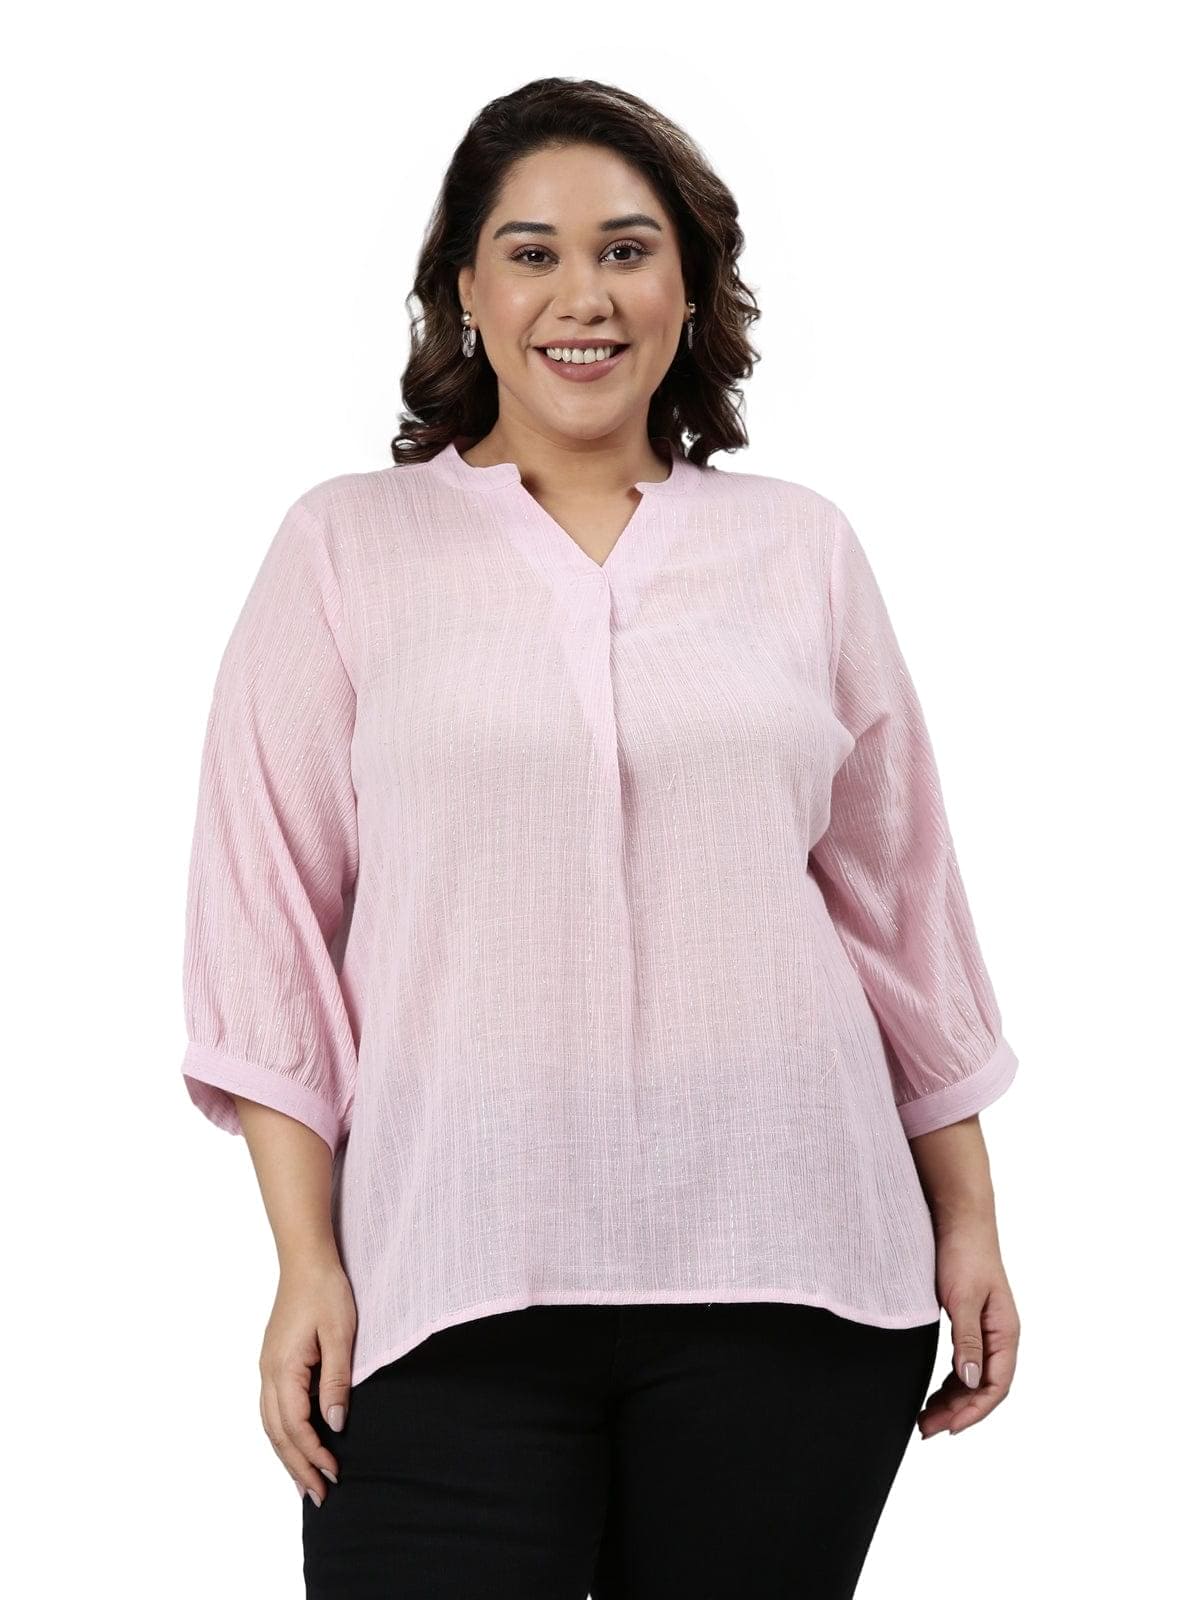 buy TheShaili PINK TOP at best prices  in India